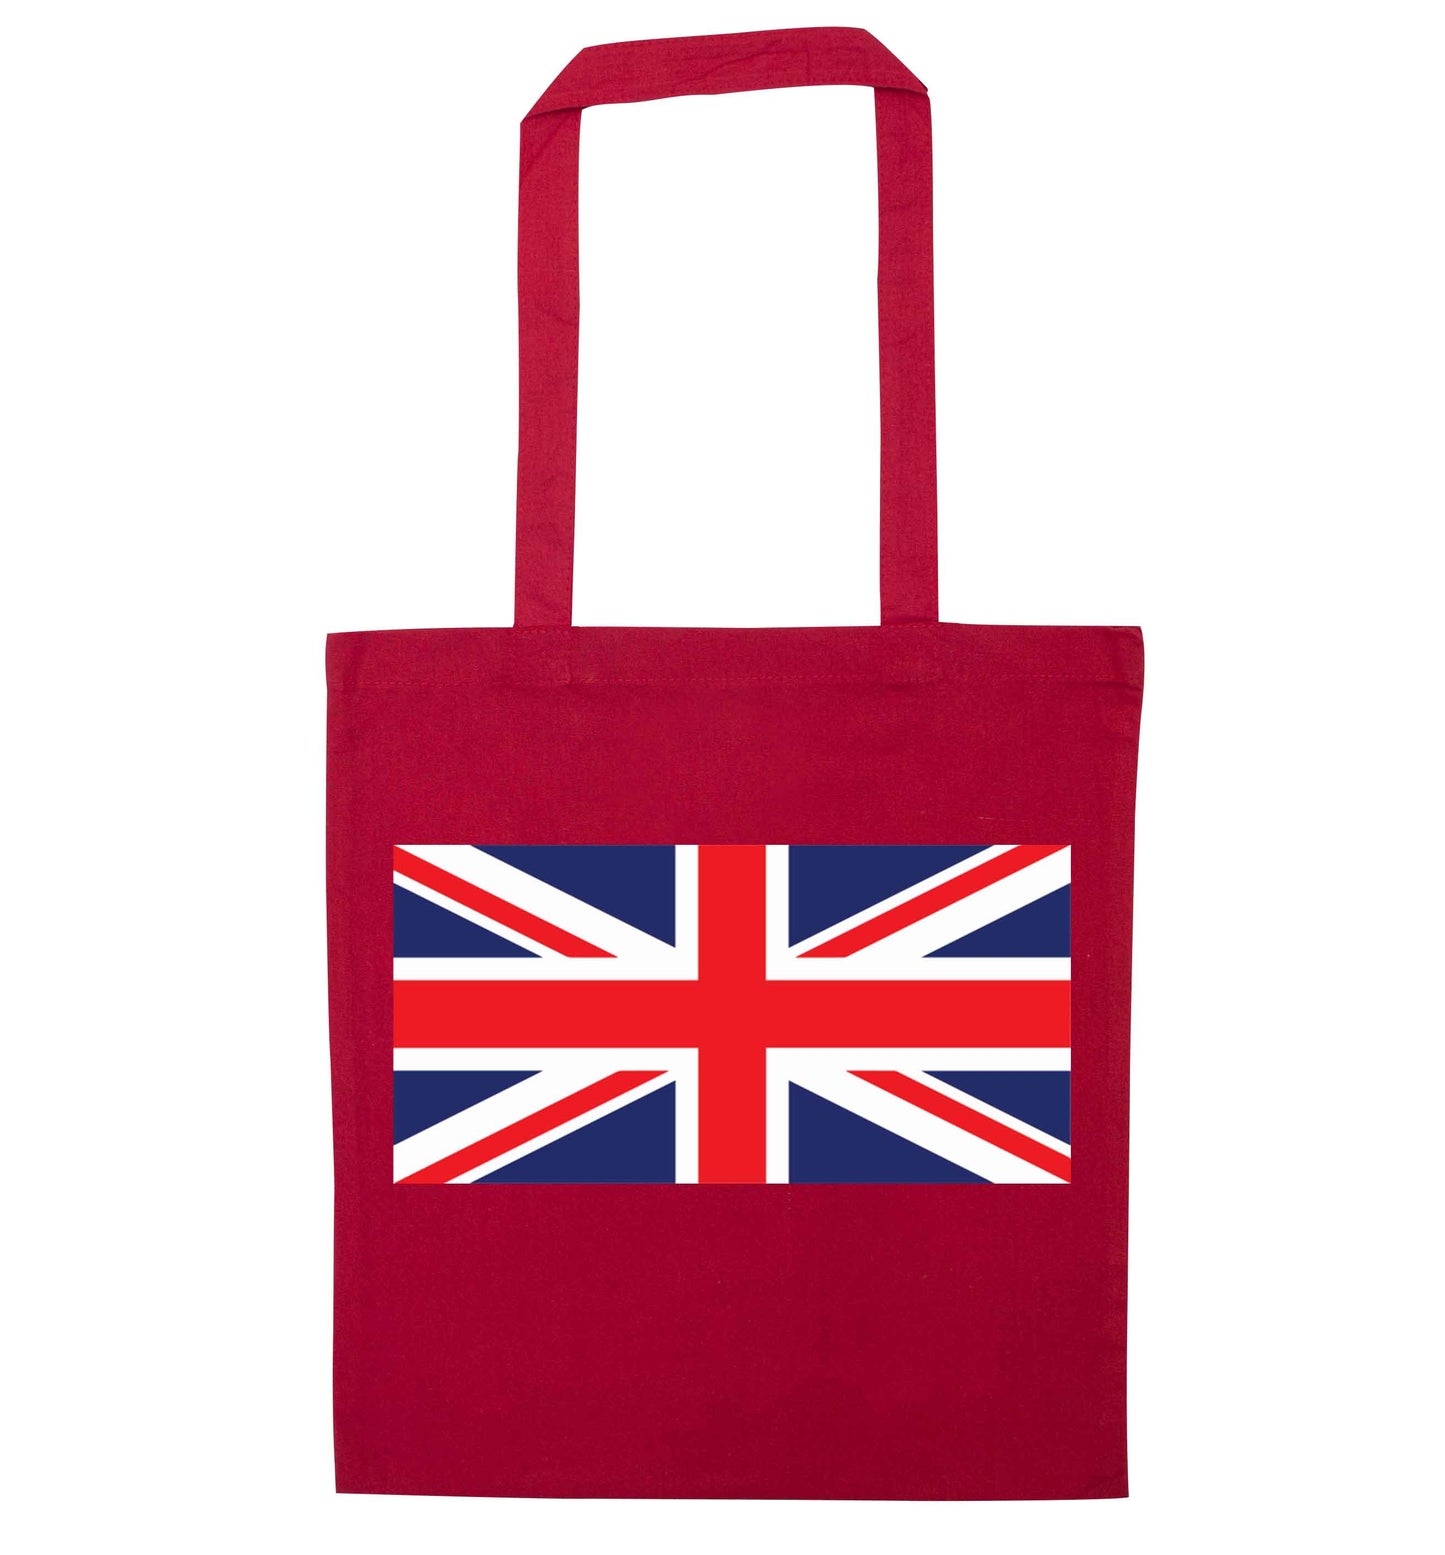 Union Jack red tote bag